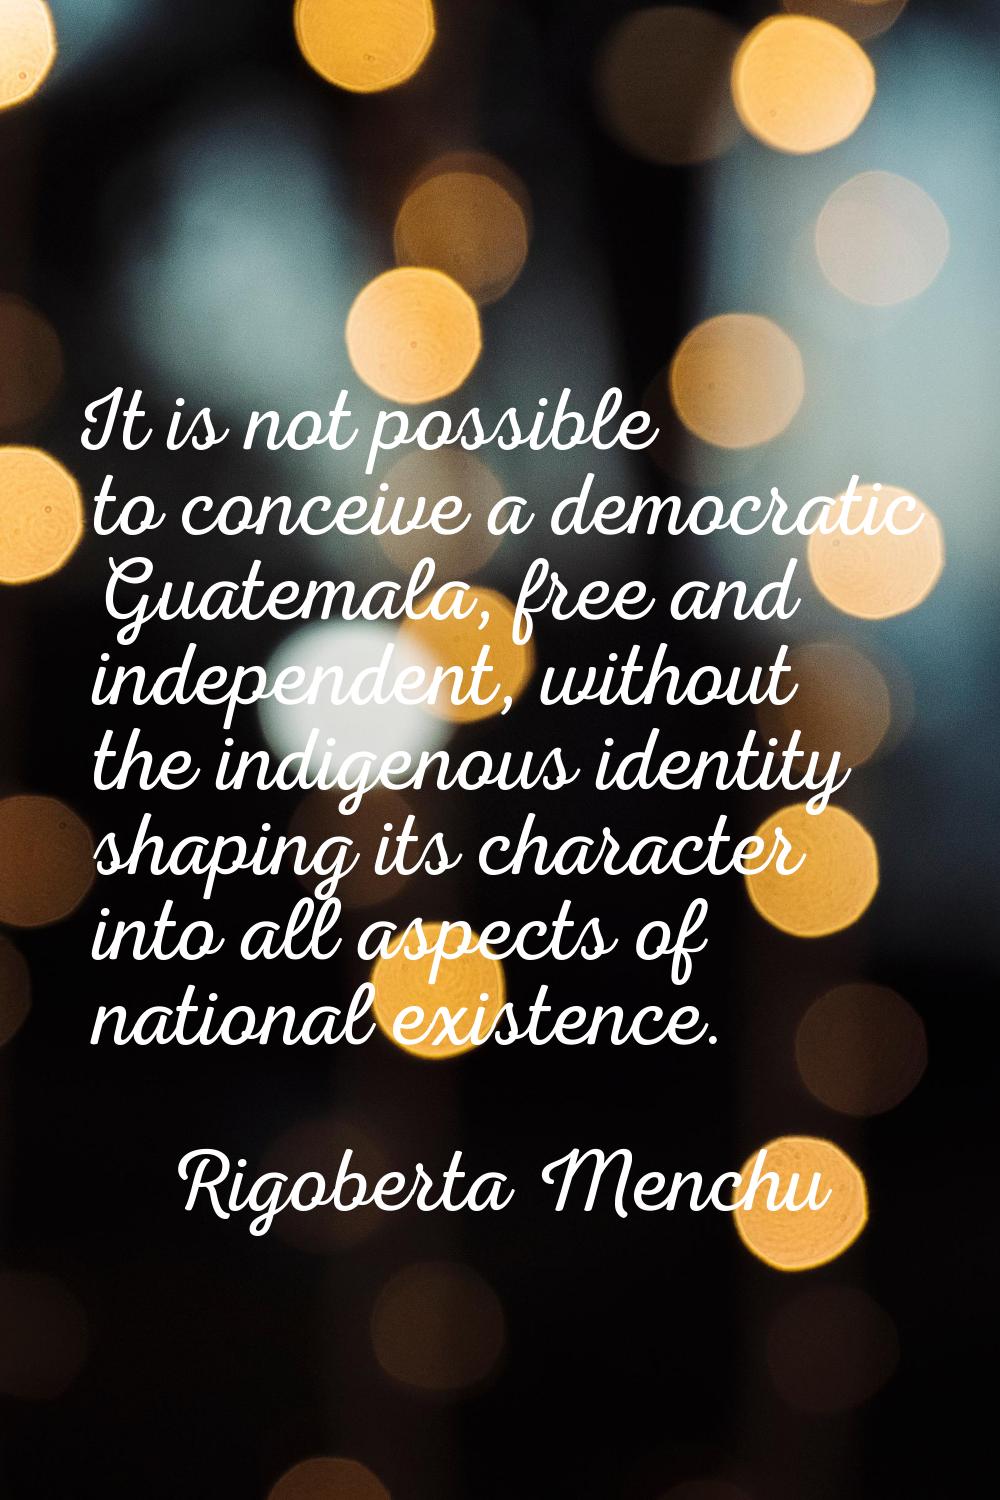 It is not possible to conceive a democratic Guatemala, free and independent, without the indigenous